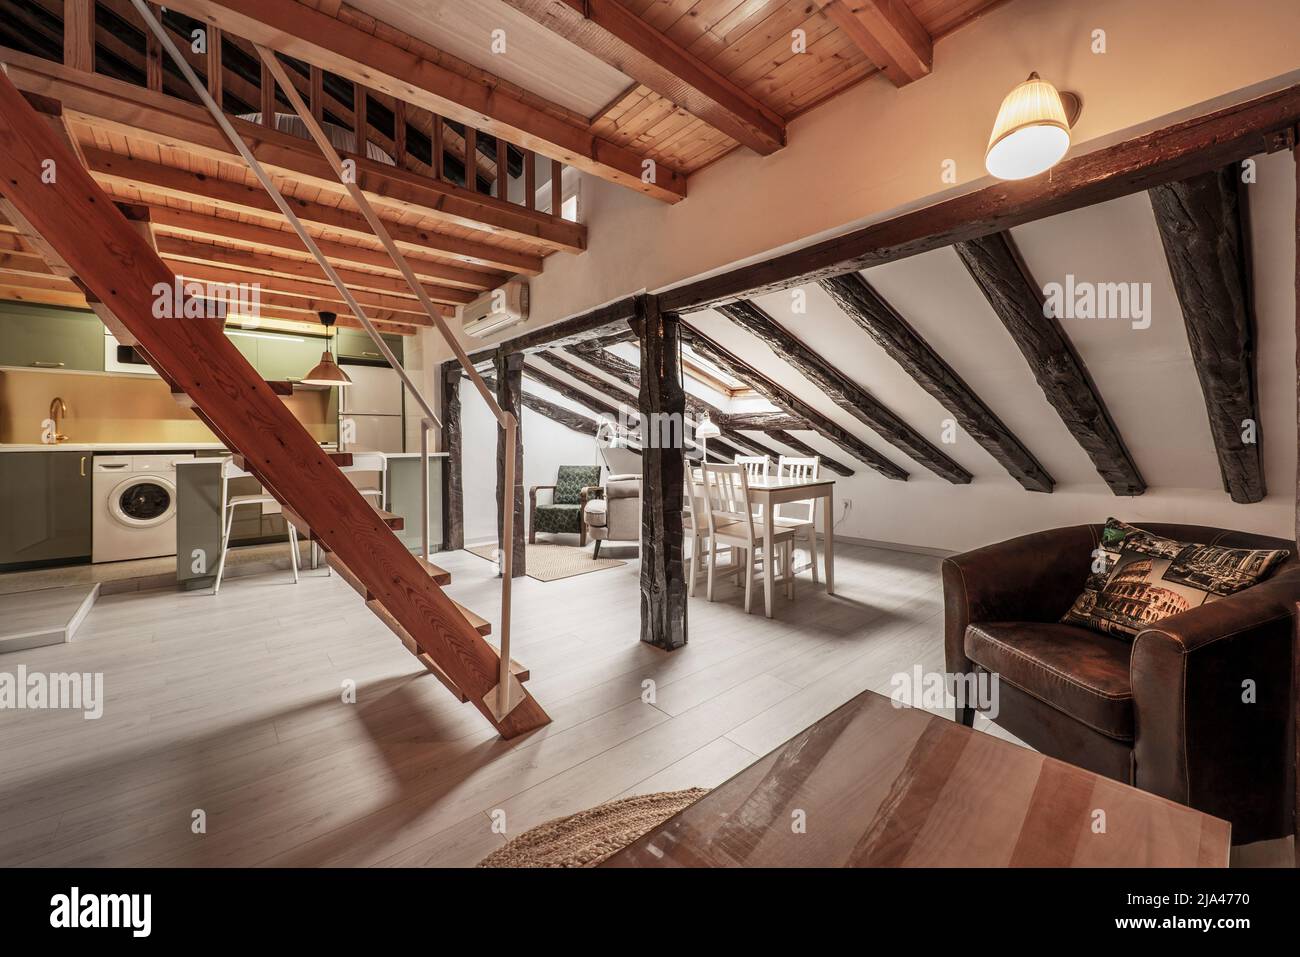 living room of a studio apartment with wooden beams and columns on the sloping ceilings, wooden staircase and open kitchen in the background Stock Photo